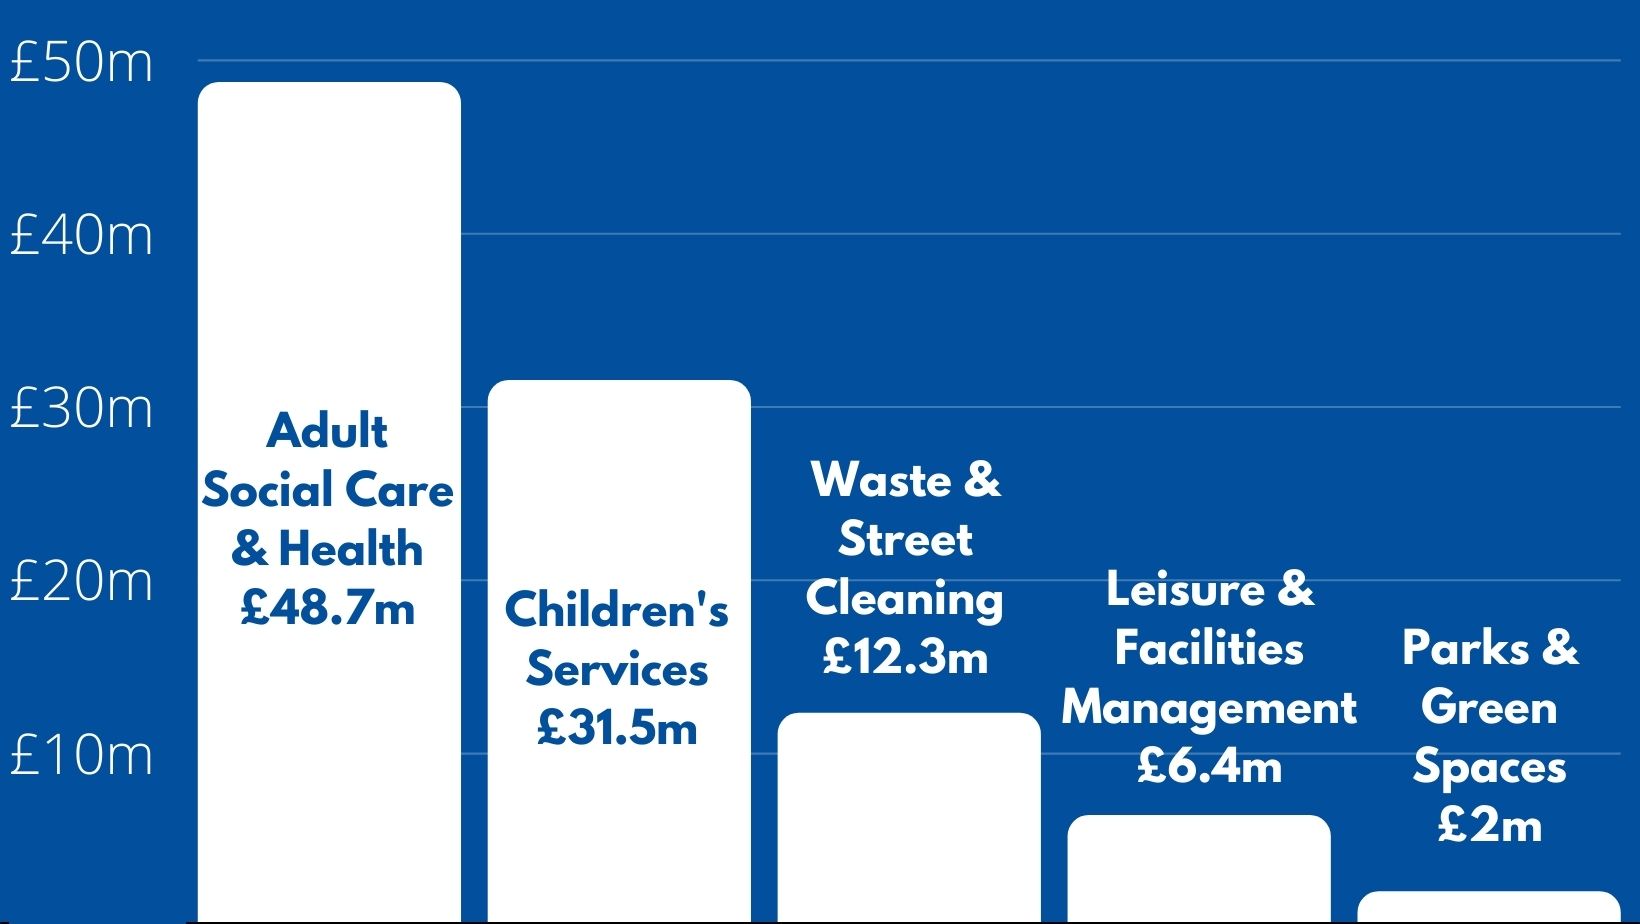 Where does the council spend the money?